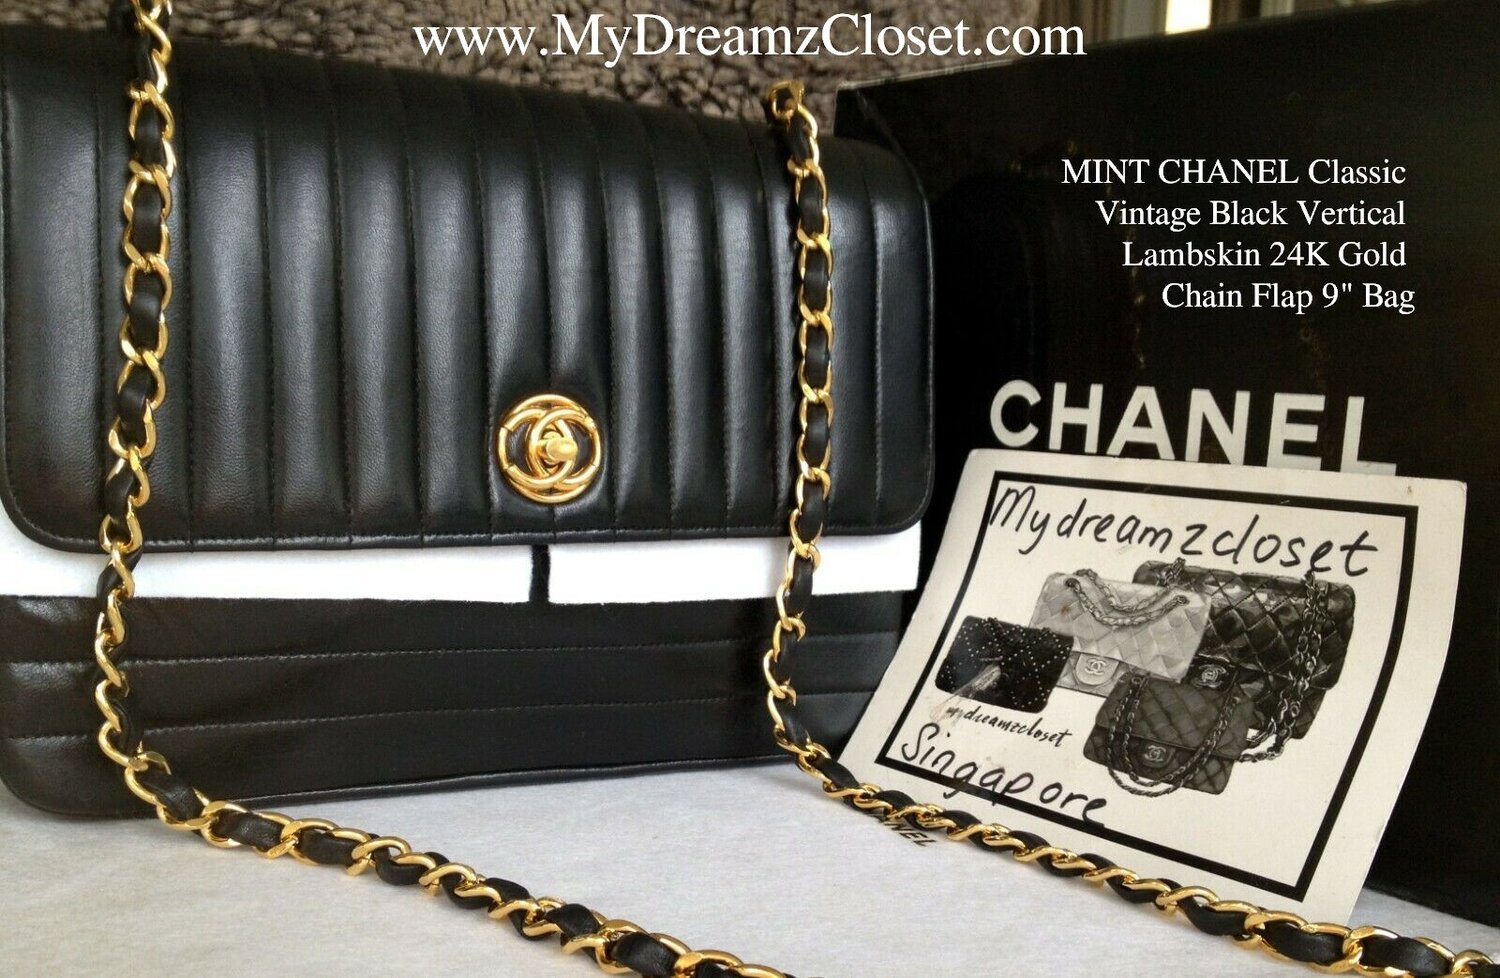 NEW CHANEL 2021 Flap Coin Purse with Chain. 100% Authentic.